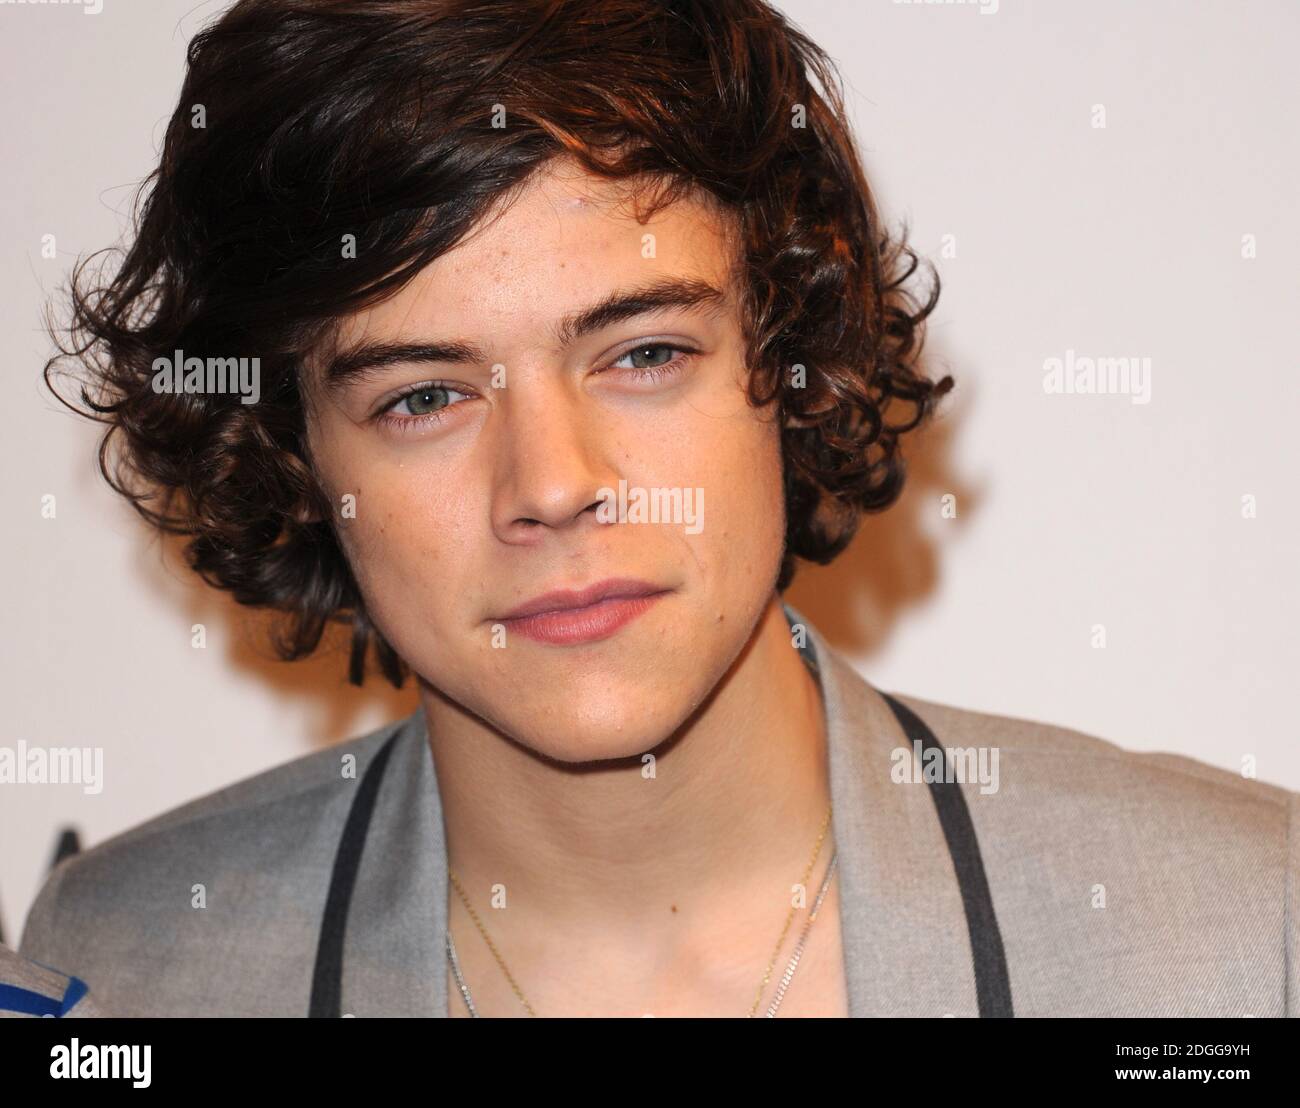 Harry Styles from One Direction at the Capital FM Jingle Bell Ball 2011, the O2 Arena, Greenwich, London. Stock Photo